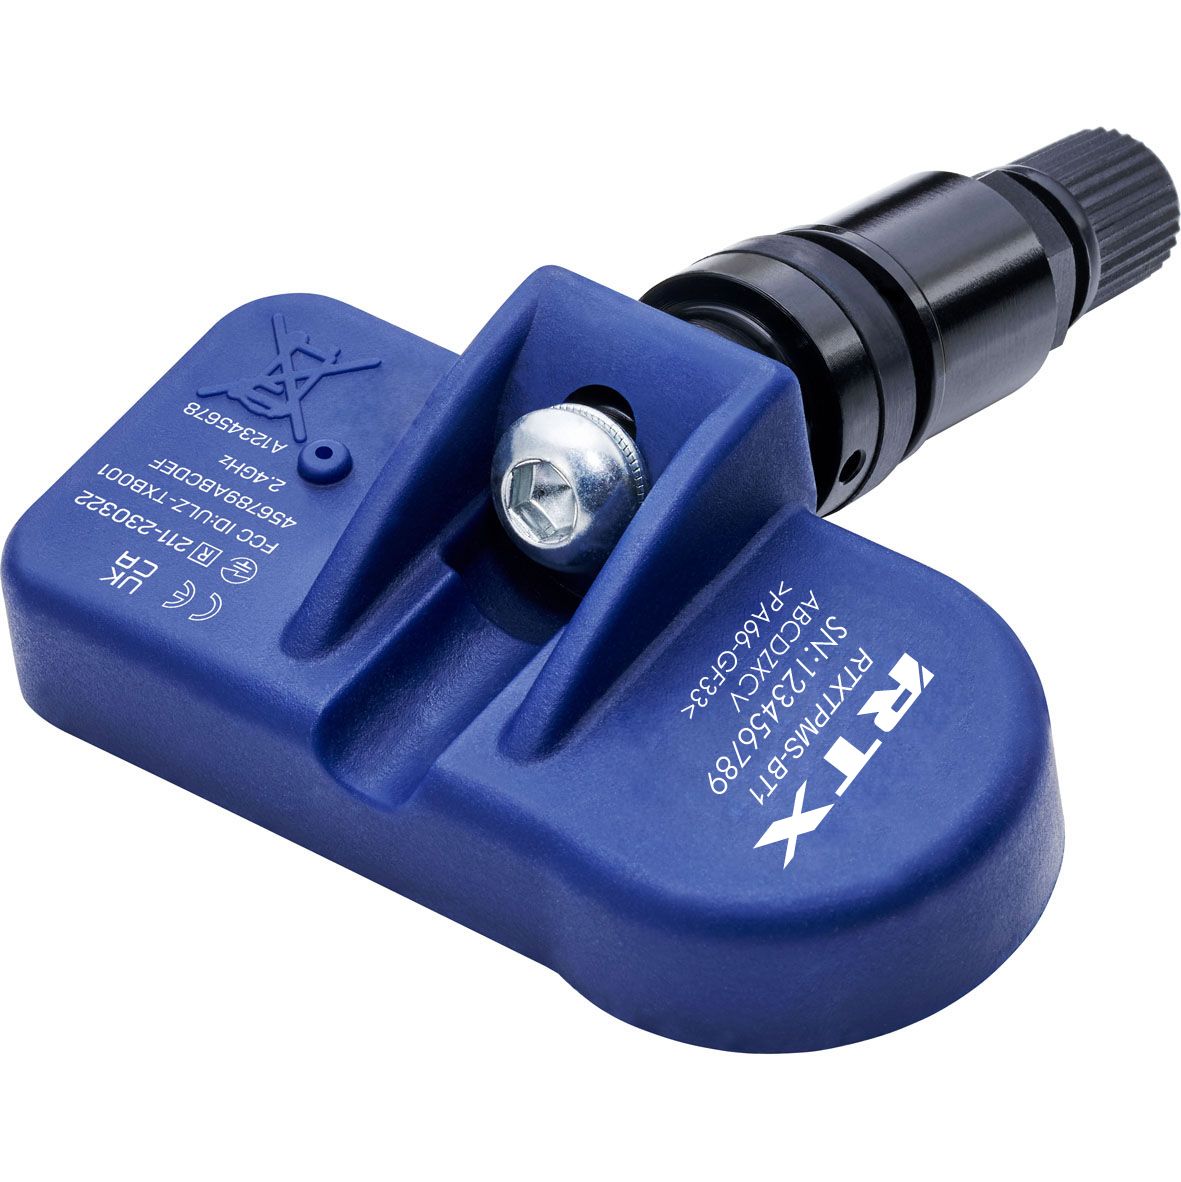 Universal TPMS Valve for Tire Pressure Monitoring